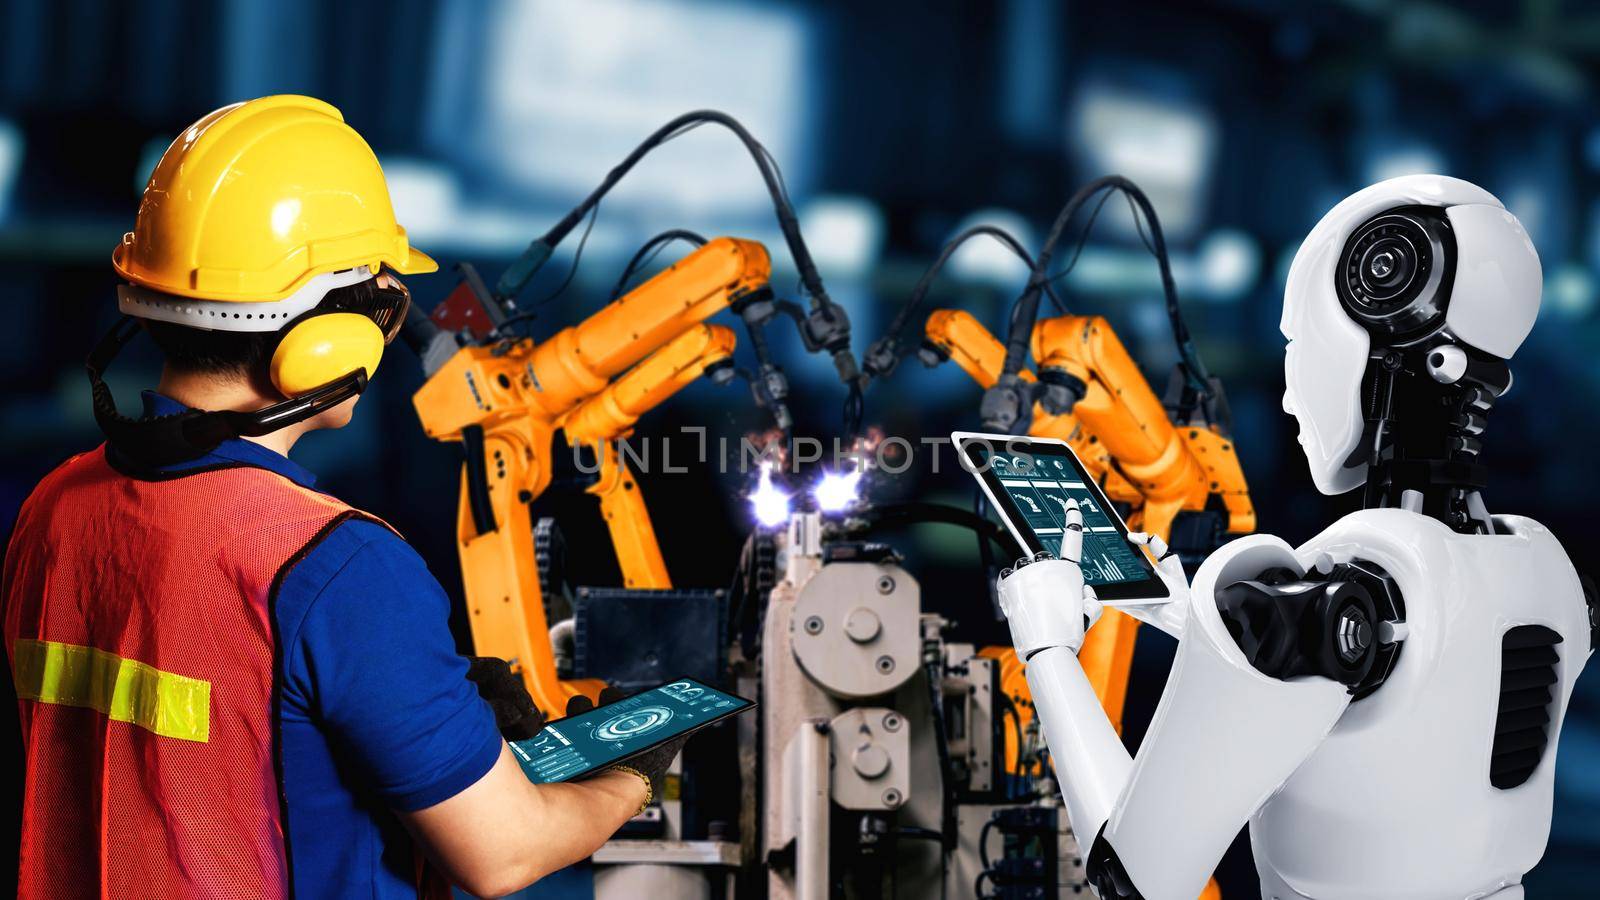 Cybernated industry robot and human worker working together in future factory by biancoblue